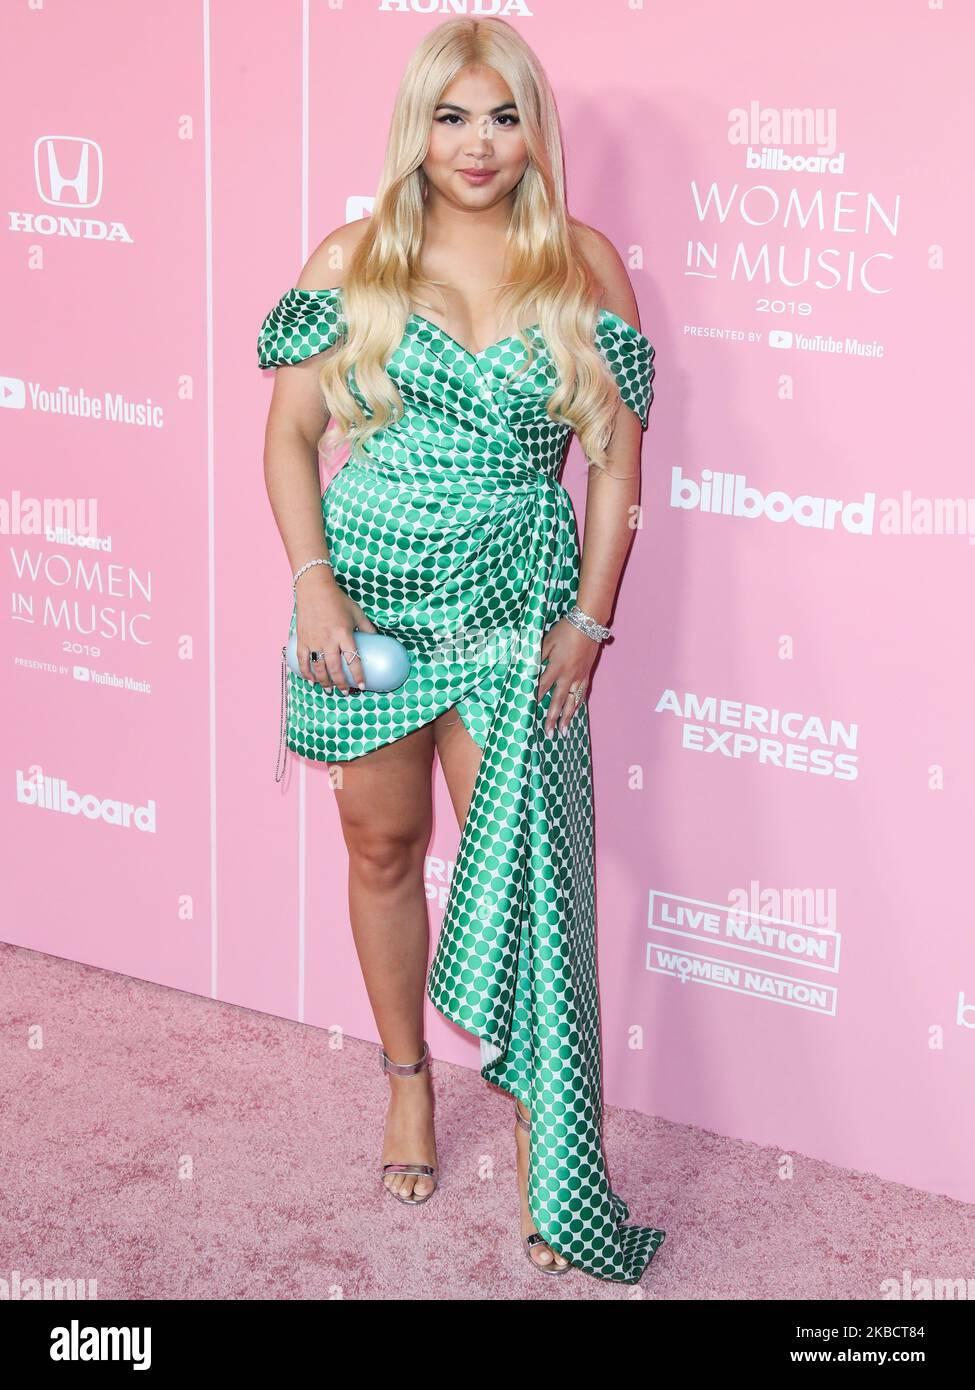 HOLLYWOOD, LOS ANGELES, CALIFORNIA, USA - DECEMBER 12: Singer Hayley Kiyoko arrives at the 2019 Billboard Women In Music Presented By YouTube Music held at the Hollywood Palladium on December 12, 2019 in Hollywood, Los Angeles, California, United States. (Photo by Xavier Collin/Image Press Agency/NurPhoto) Stock Photo